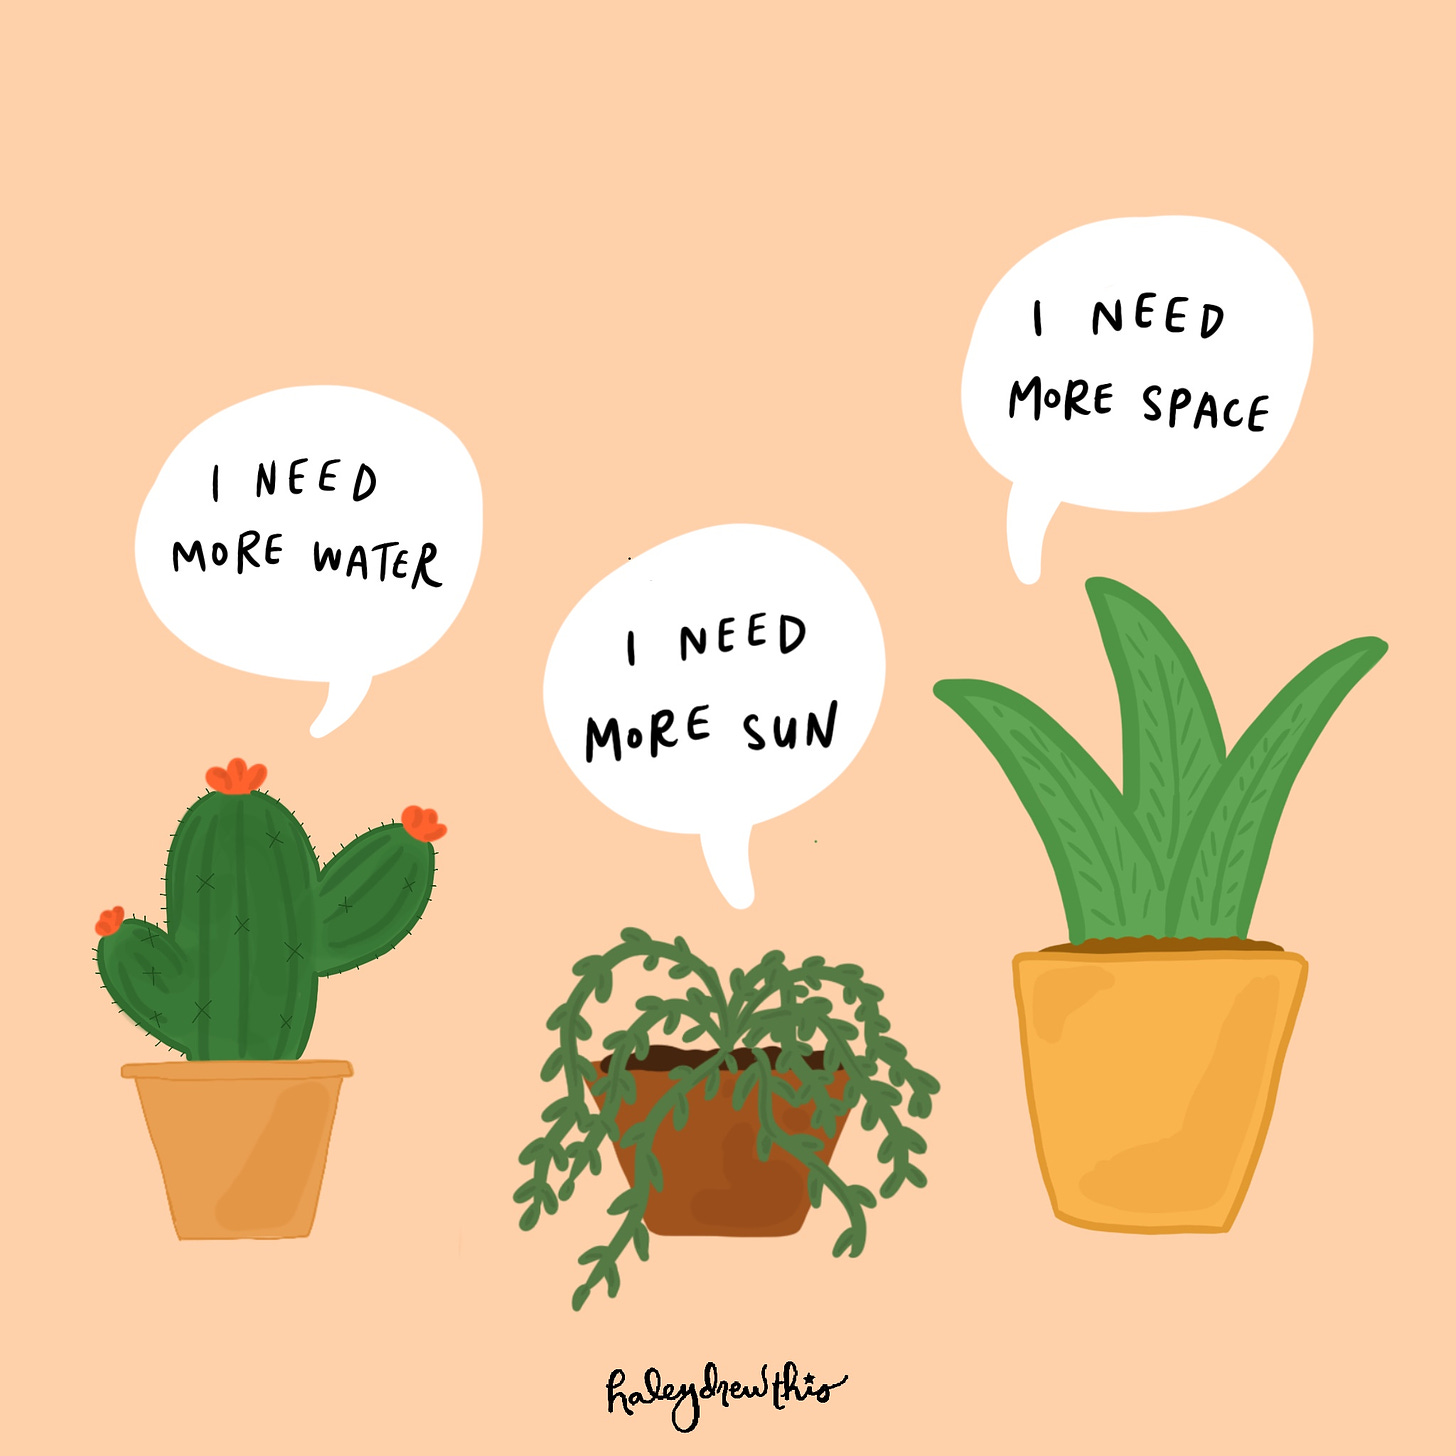 three plants with speech bubbles that read, "I need more water," "I need more sun," and "I need more space."